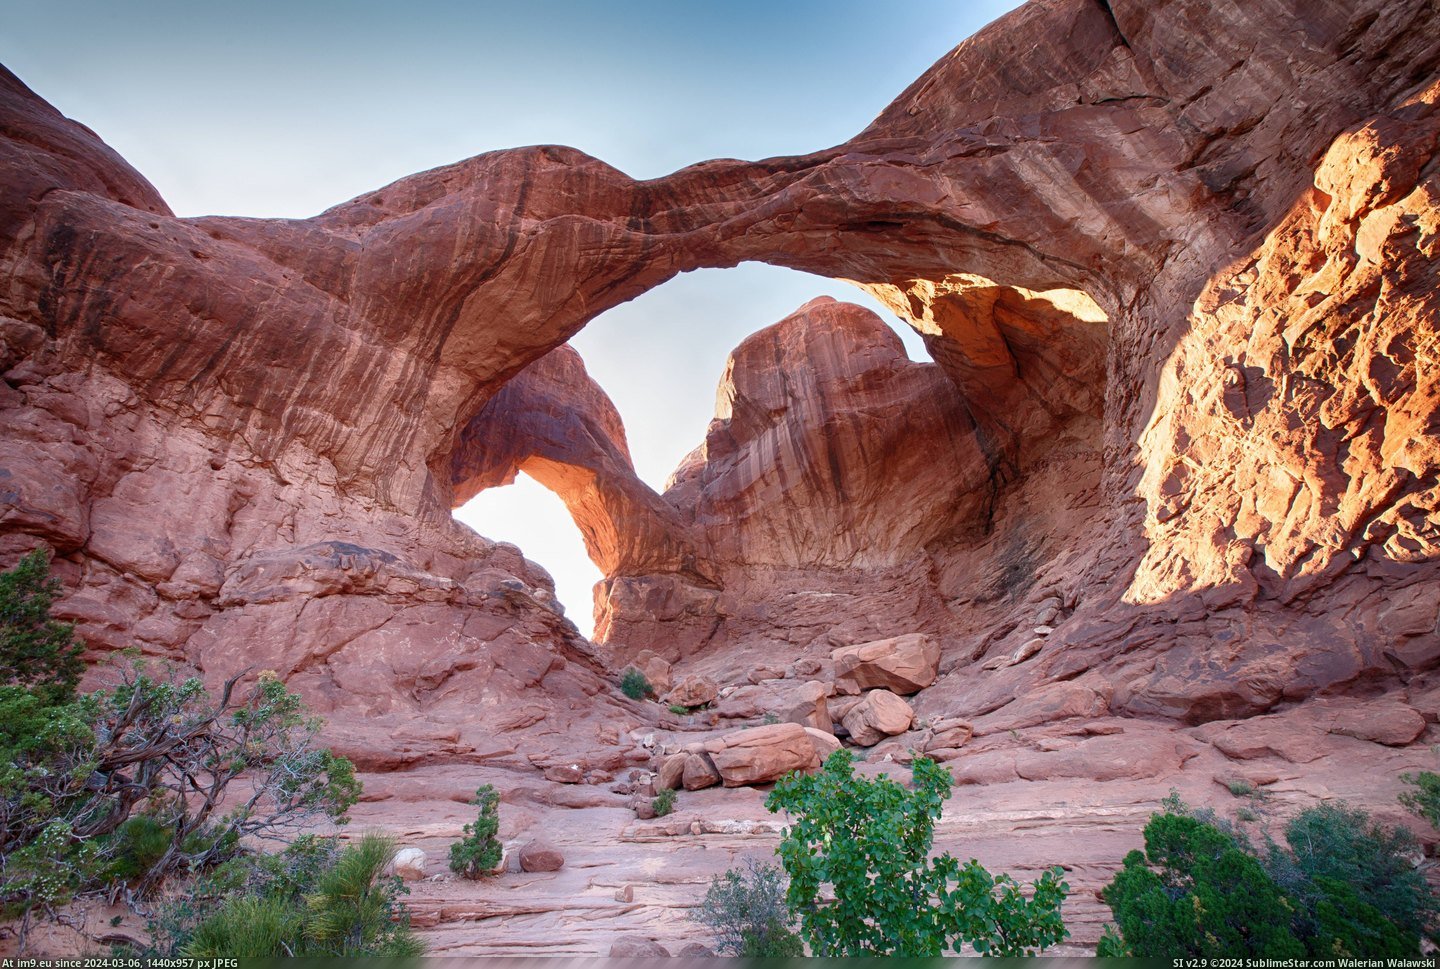 #Park #National #Arches #5616x3744 #Moab #Double #Arch [Earthporn] Double Arch at Arches National Park, Moab, UT  [5616x3744] Pic. (Изображение из альбом My r/EARTHPORN favs))